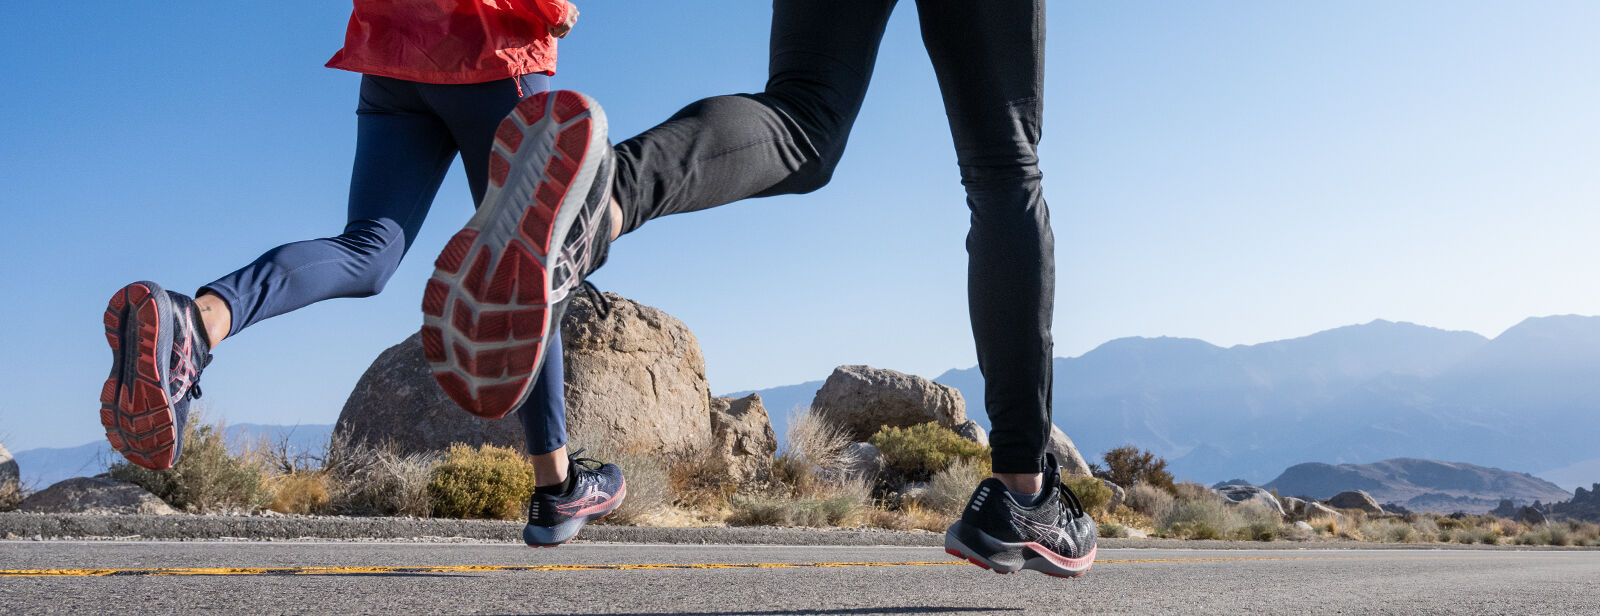 Pronation Guide: What Is Pronation and Why Does it Matter? | ASICS | ASICS